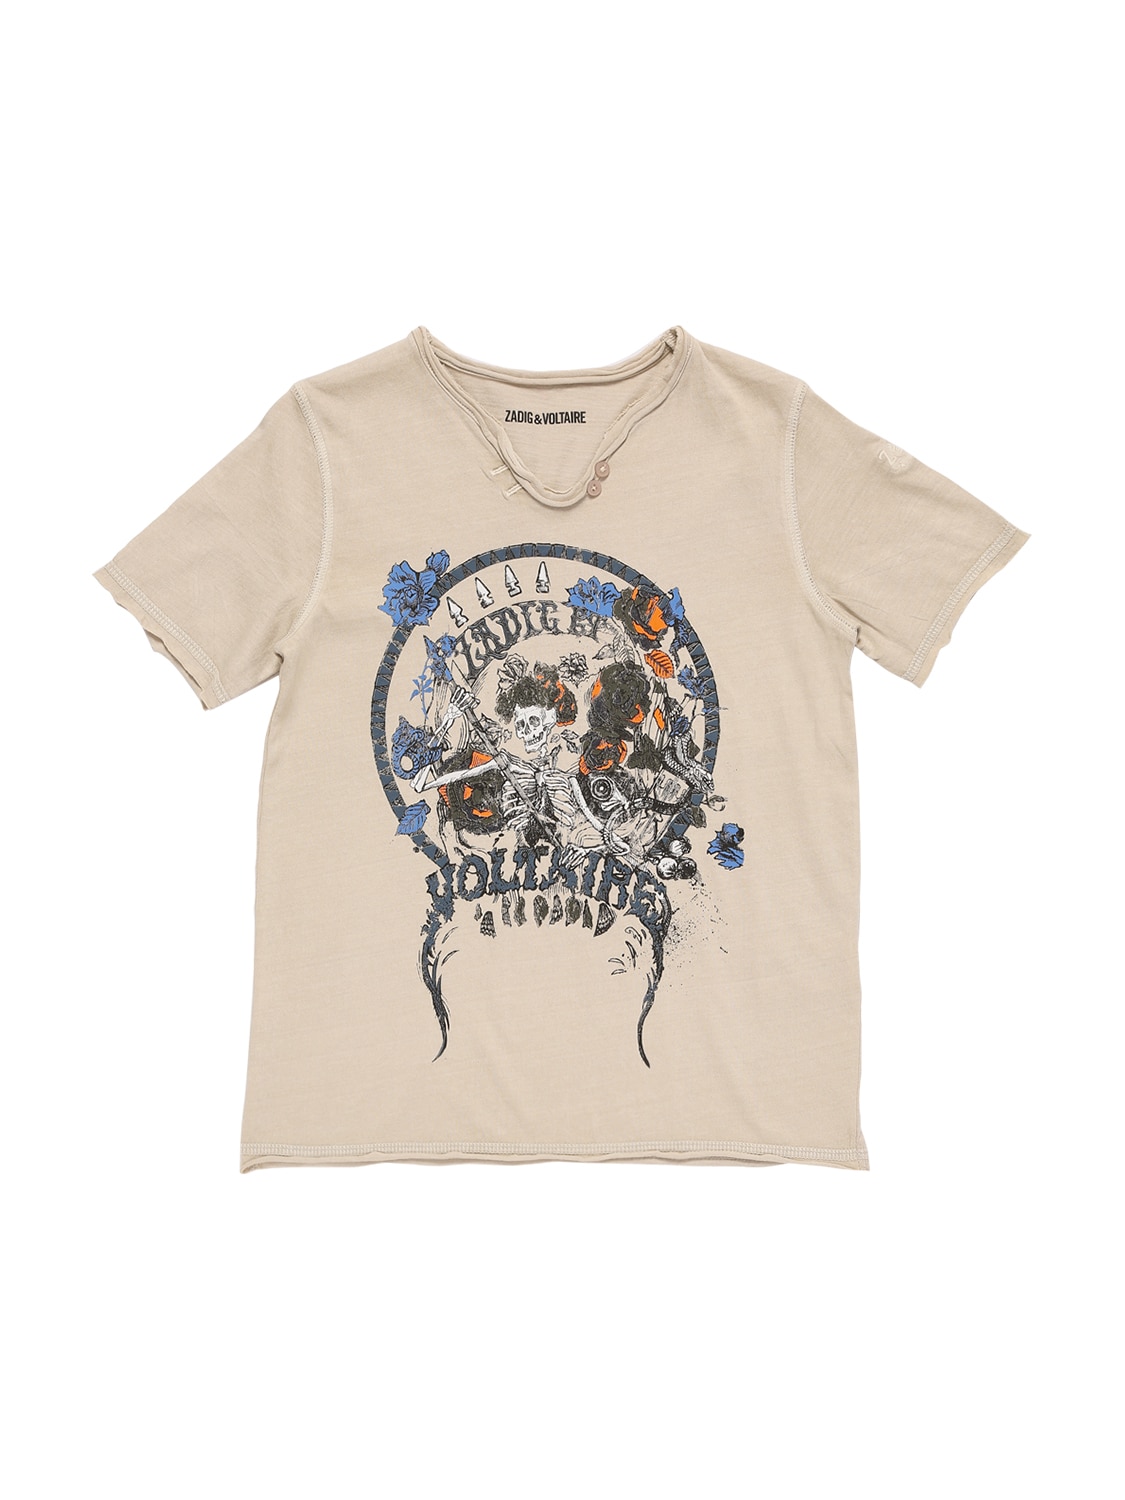 ZADIG & VOLTAIRE PRINTED COTTON JERSEY T-SHIRT,73IOFR009-MJI20